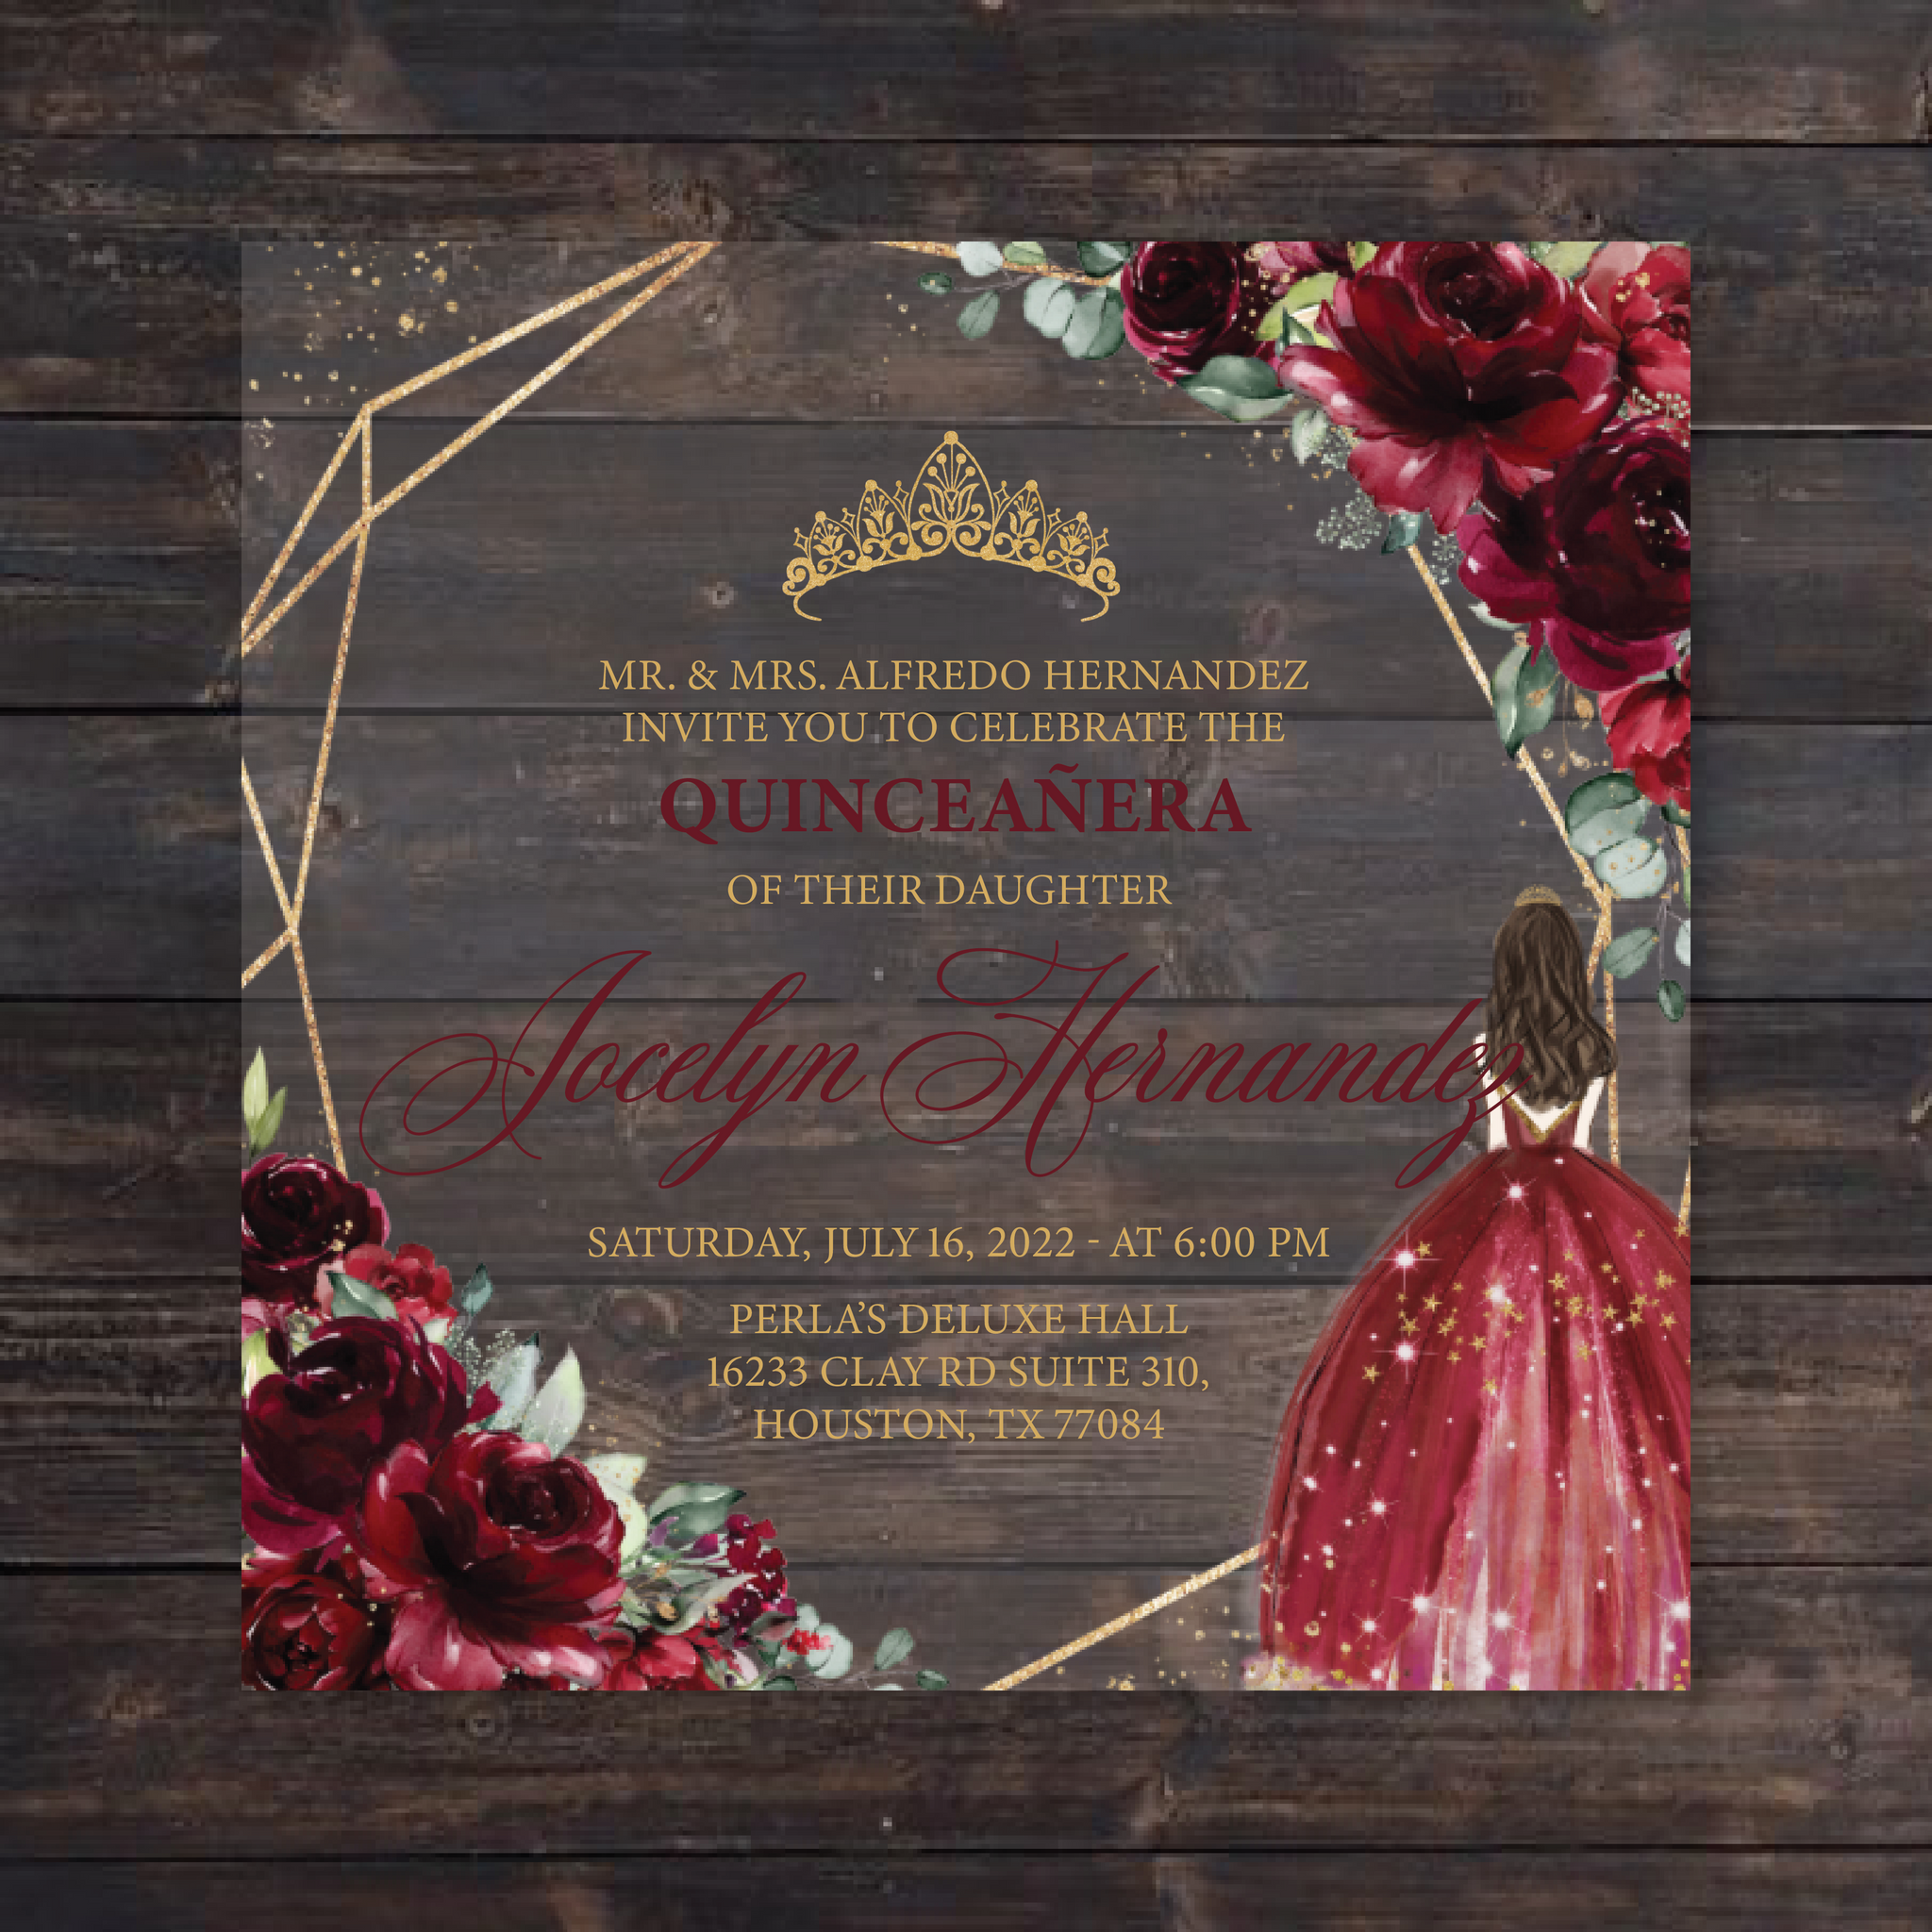 Burgundy Floral and Gold Square Acrylic Invitation